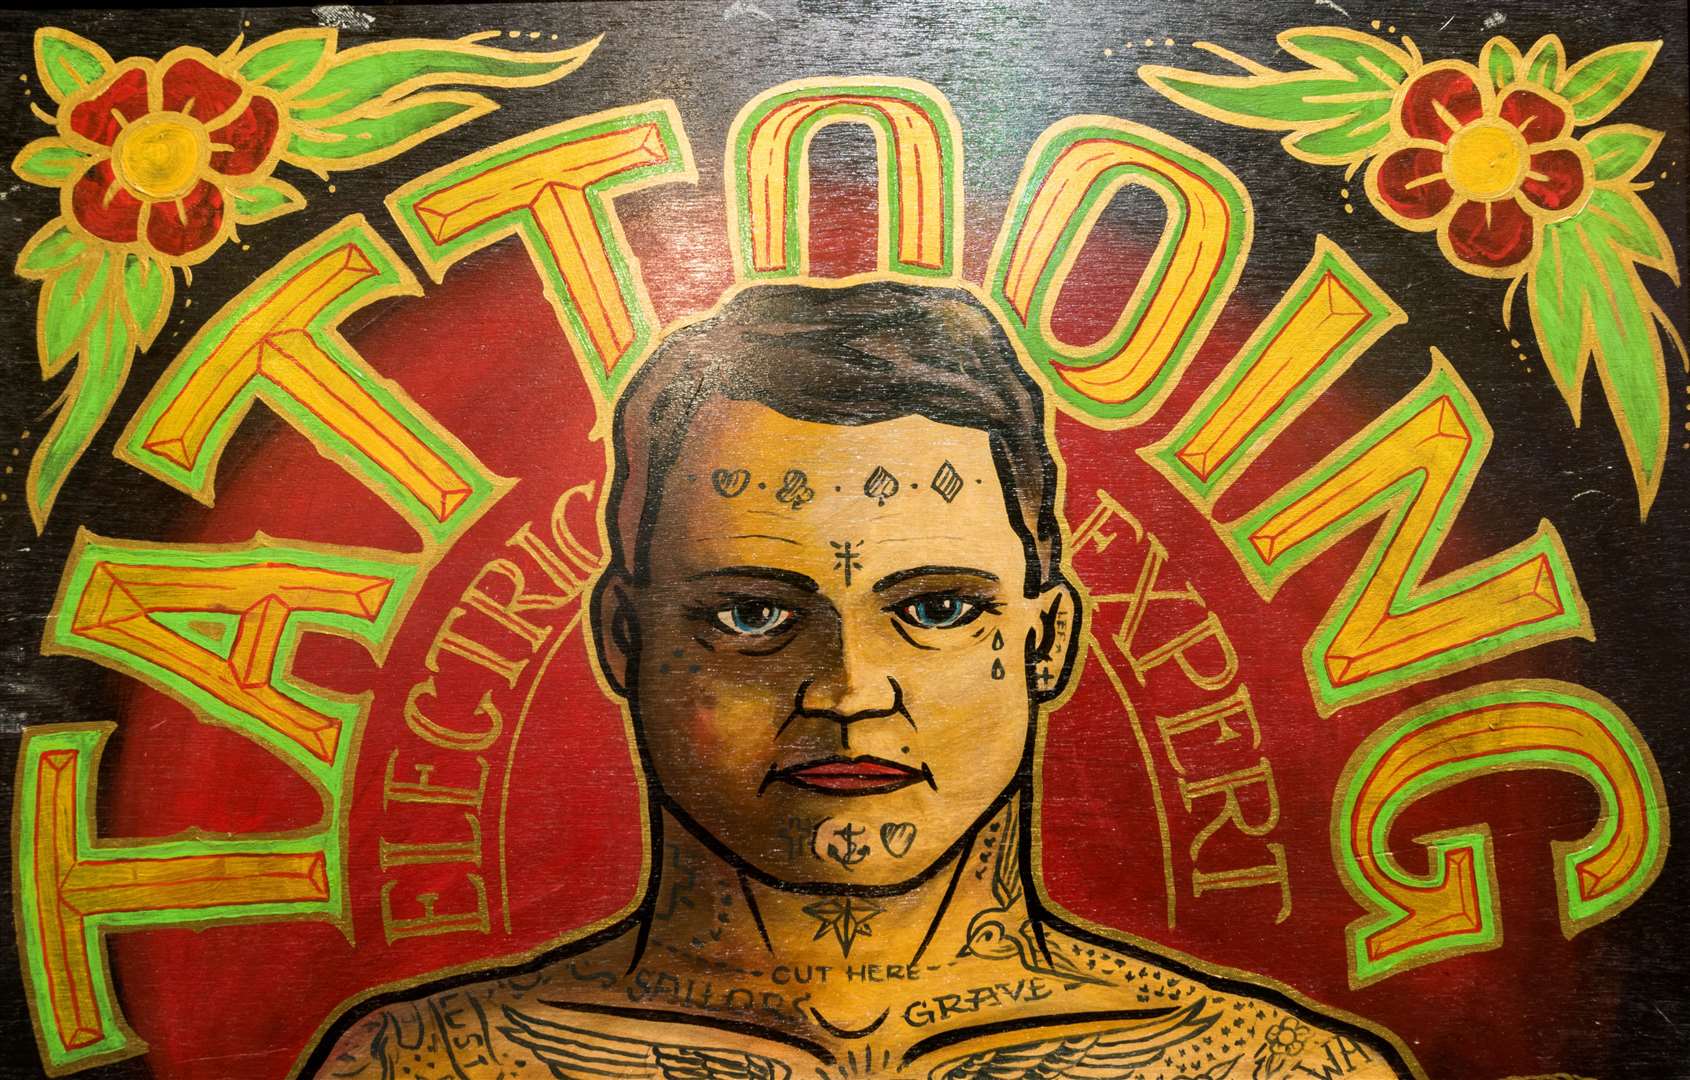 Tattoos were once the preserve of the likes of Popeye – now they’re a statement by the masses. Picture: Paul Abbitt